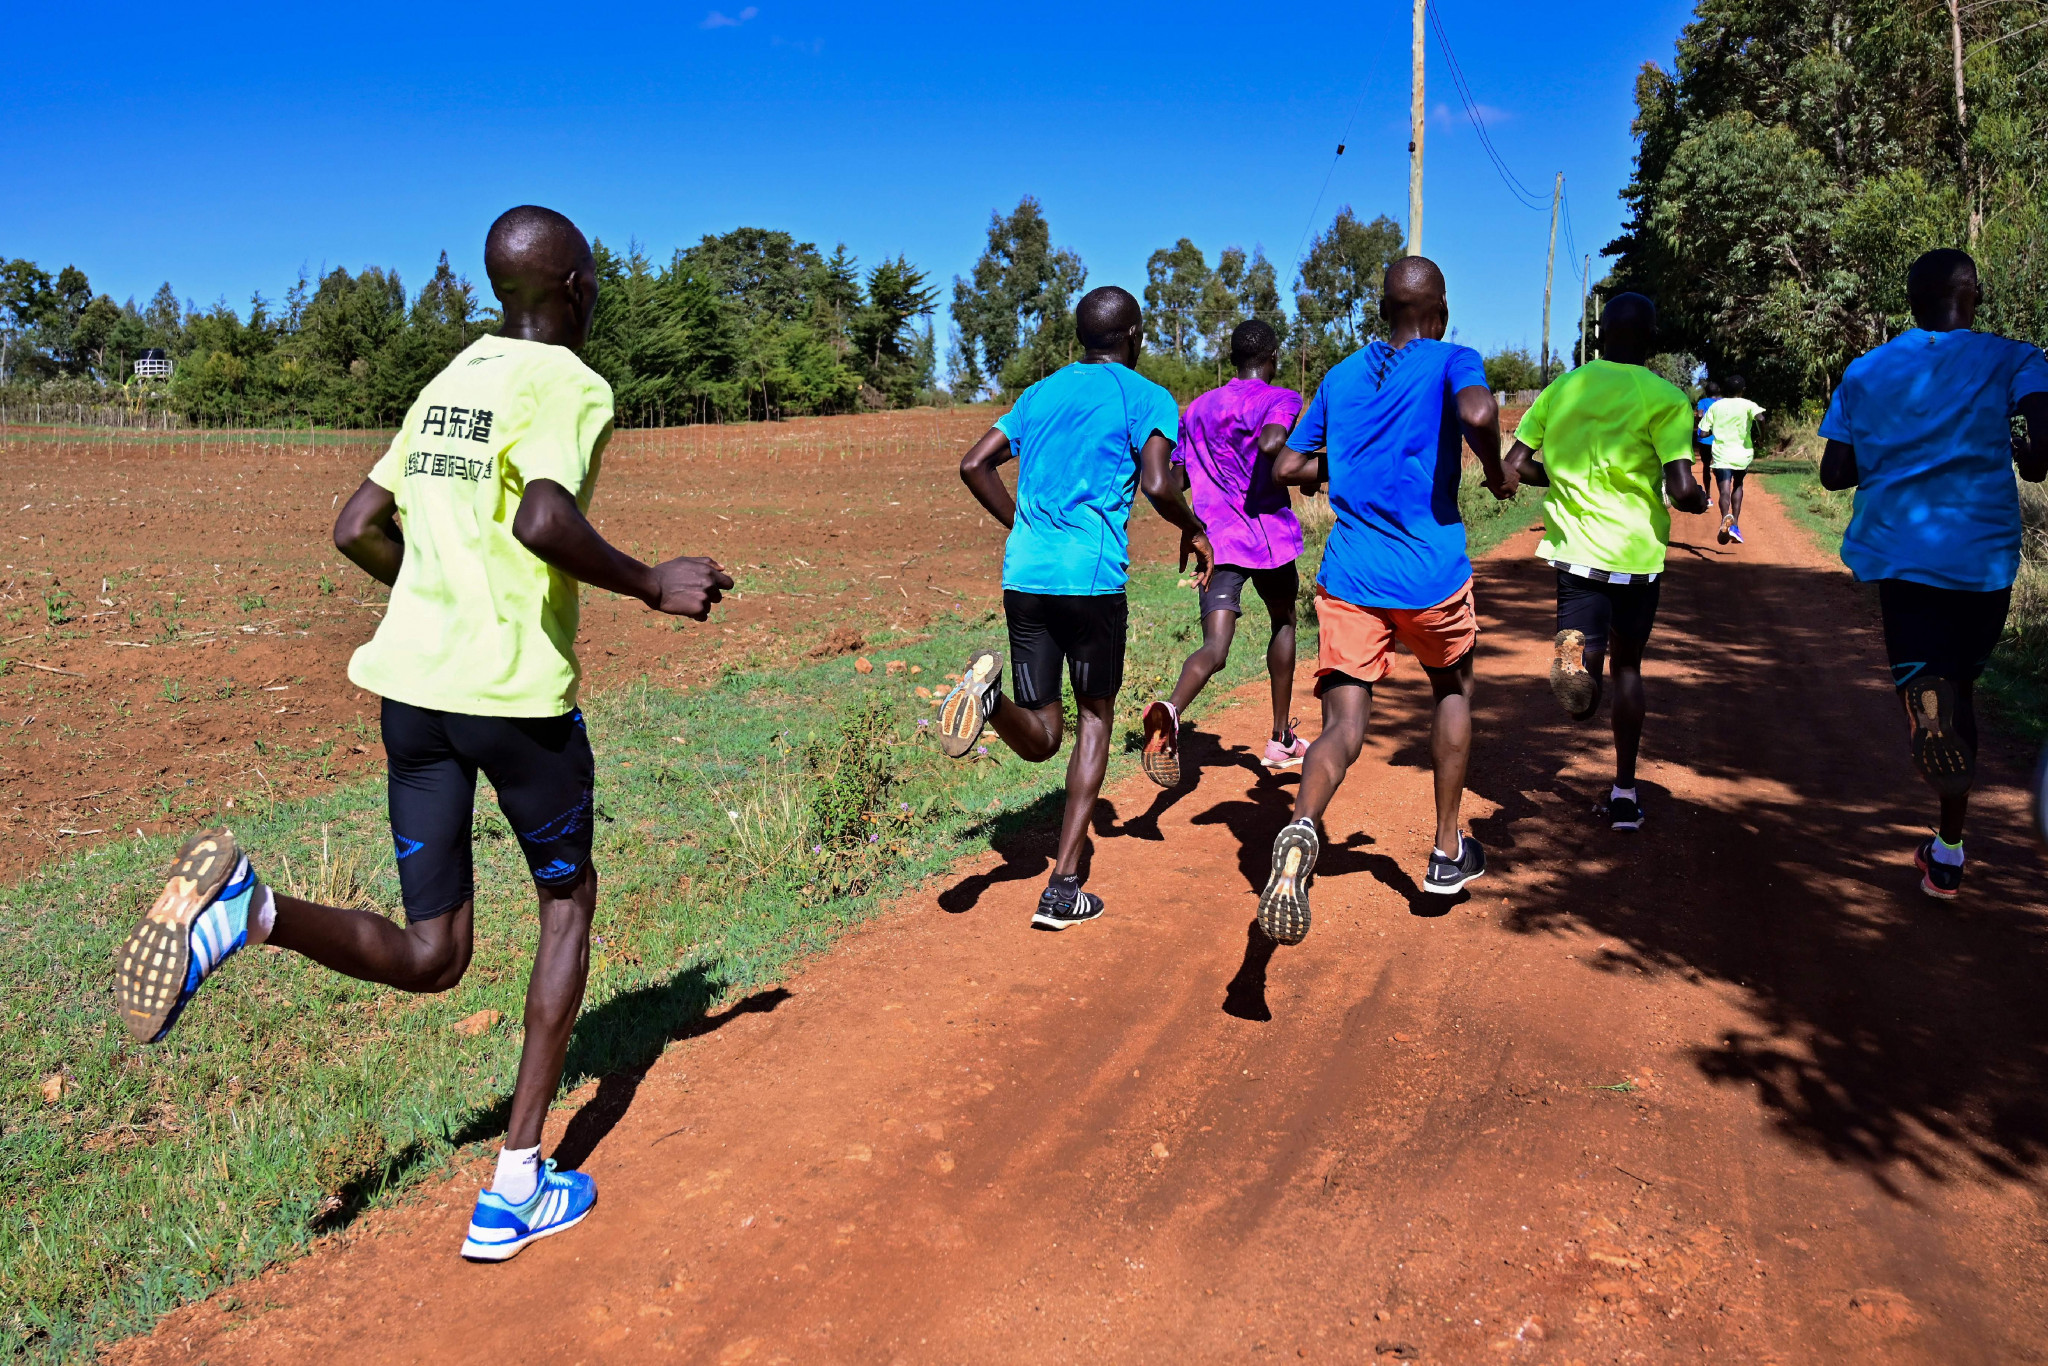 Iten is one of the world's most famous athletics bases ©Getty Images